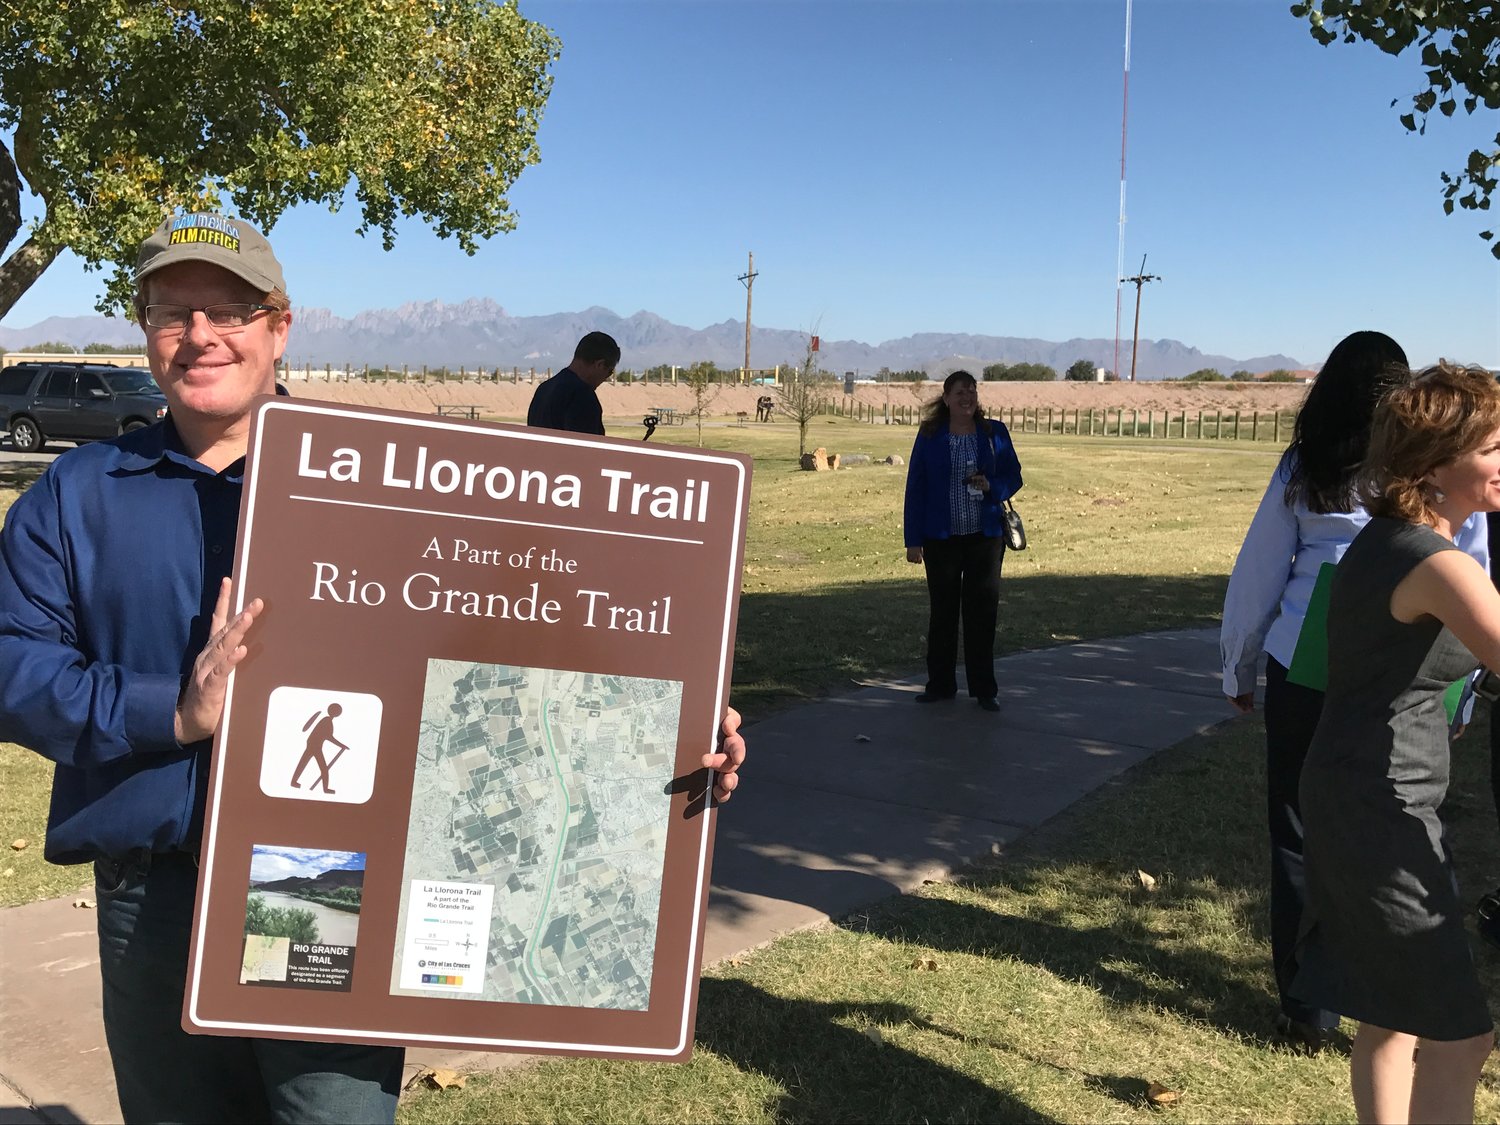 About 4.5 miles of La Llorona Trail in Las Cruces was the first segment of the Rio Grande Trail to be officially designated. State Sen. Jeff Steinborn, shown here with a trail map, drafted the bill that created the trail and the commission that is guiding its development.